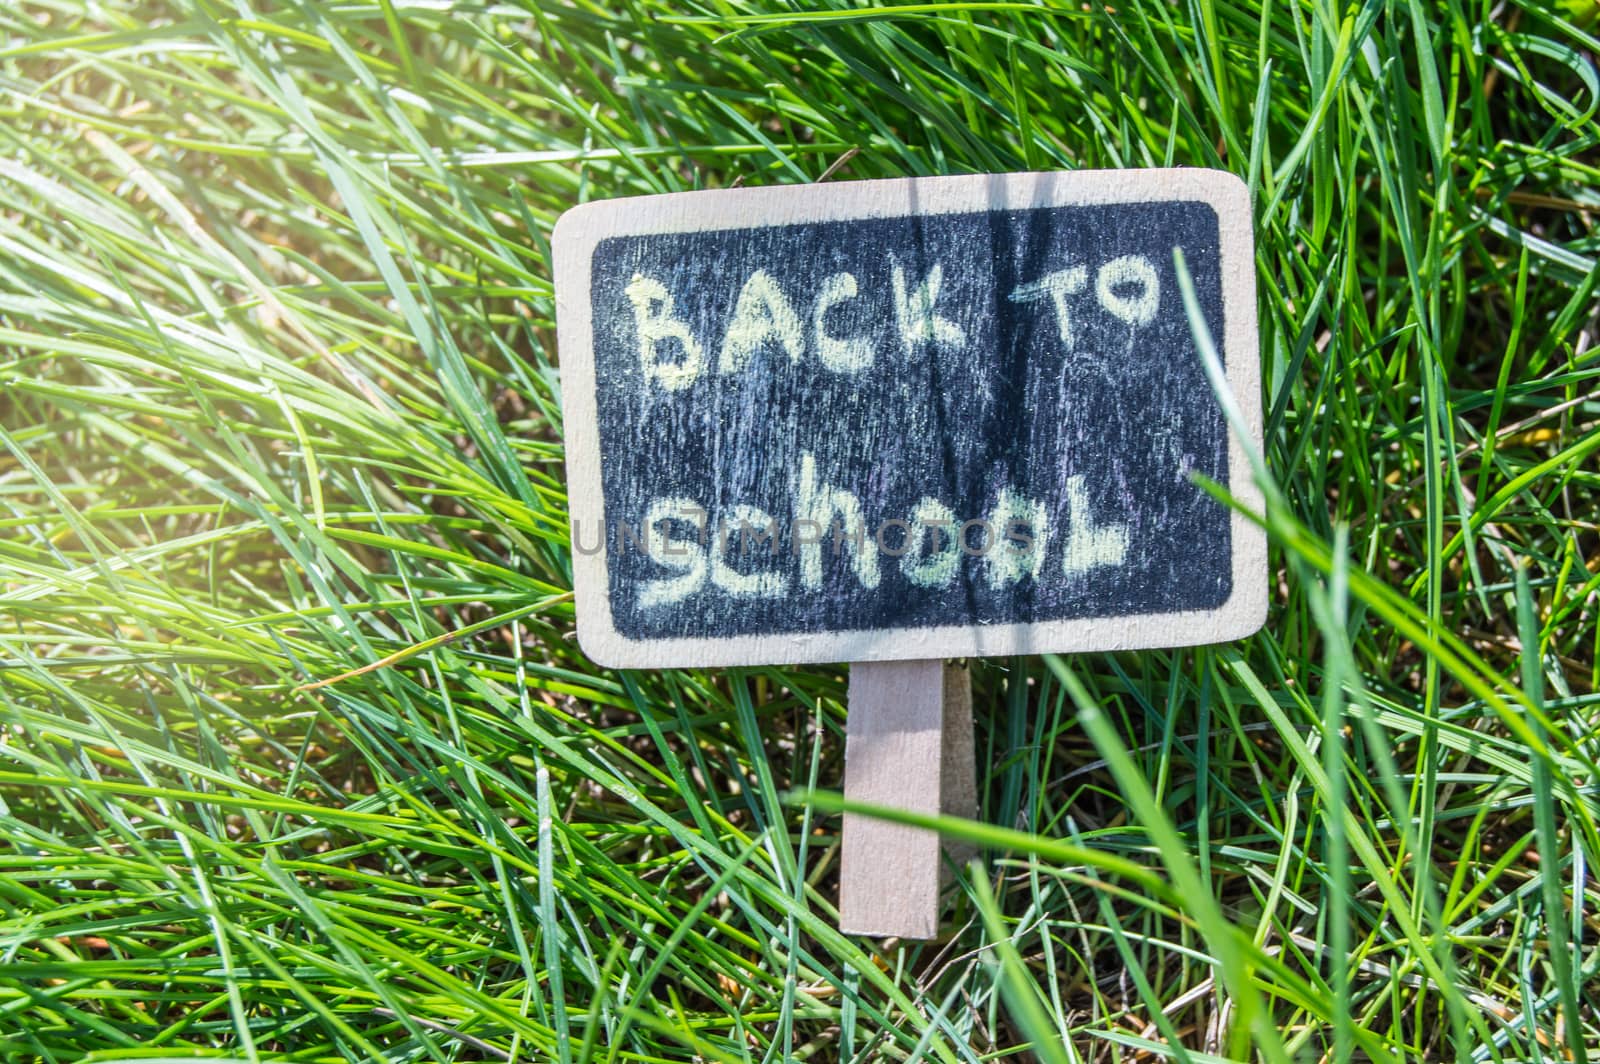 Sunlight falls on the green grass and the black Board with the inscription Back to school. The concept of education, training, teacher's Day.